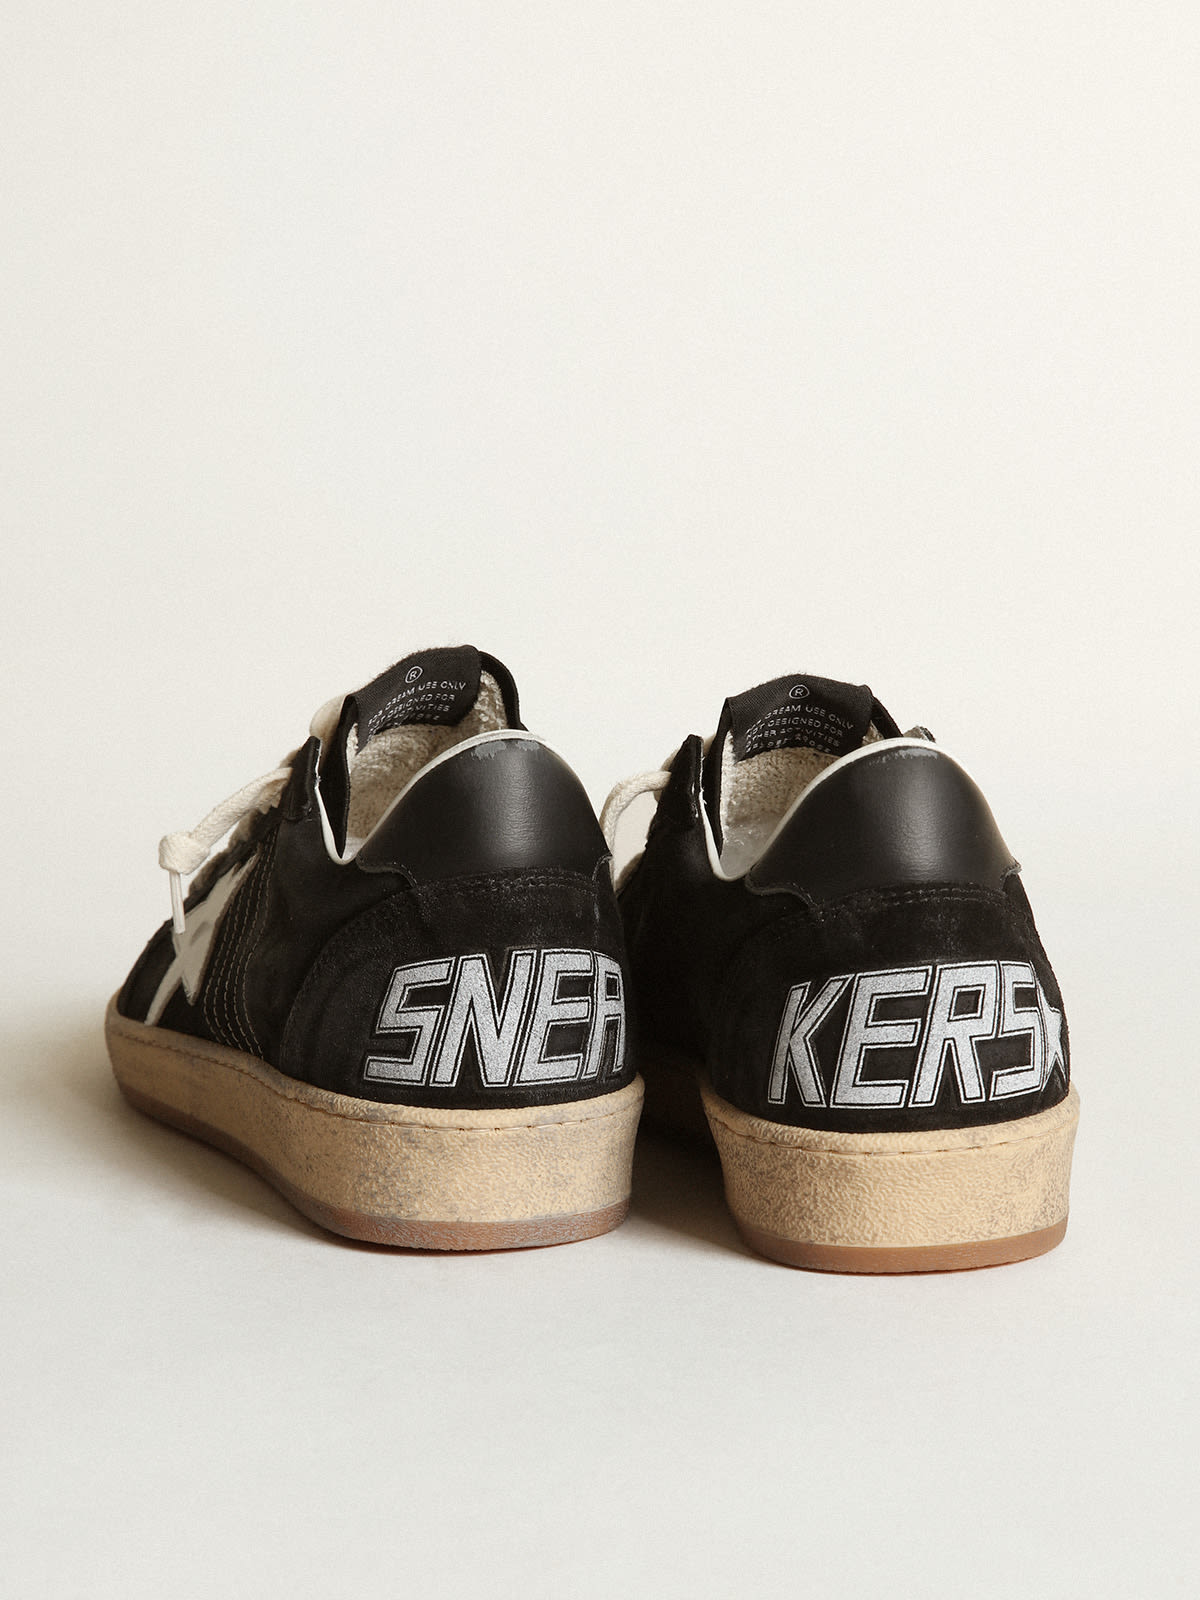 Golden Goose - Women’s Ball Star sneakers in black suede with white leather star and black leather heel tab in 